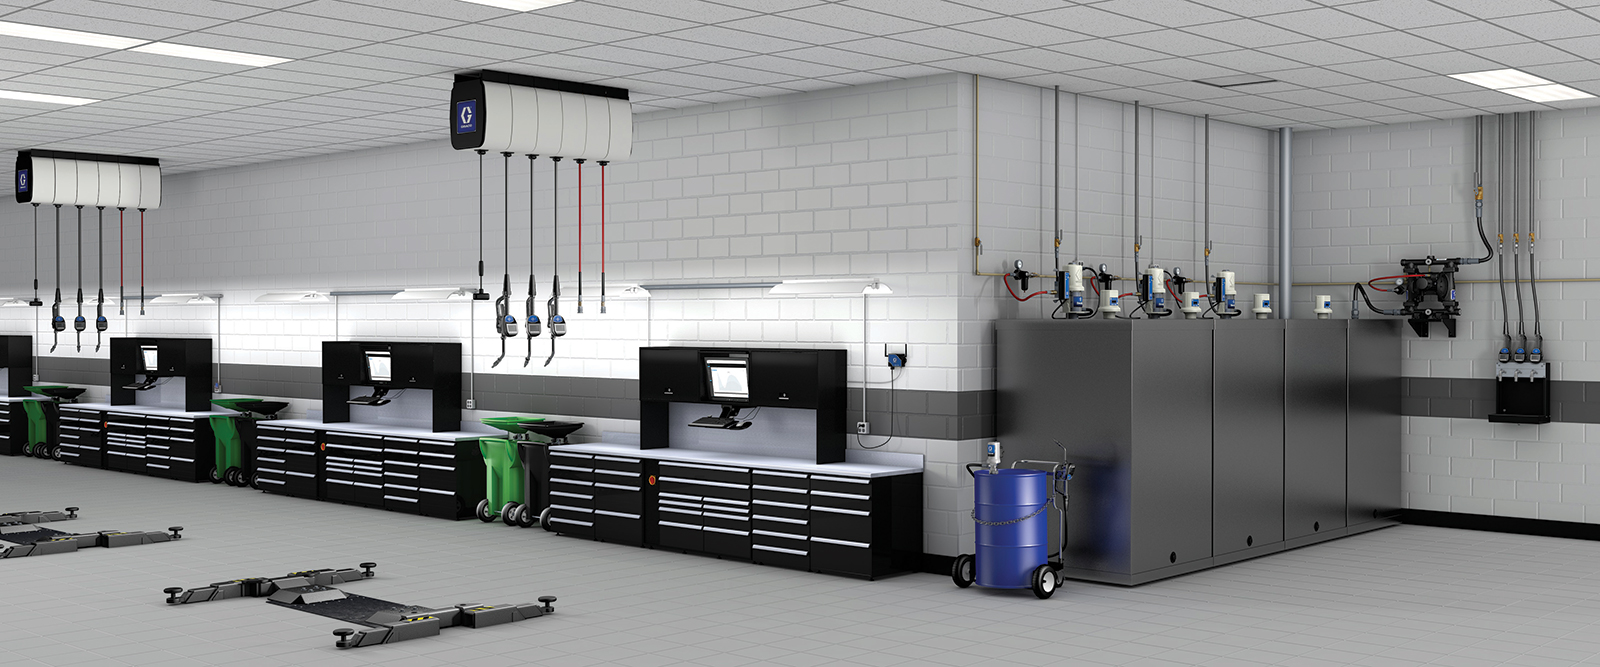 Vehicle service image showing a service shop, transfer pump, fluid management solutions, hose reel, cord reel, fluid drain, oil evacuation, meters, and dispense guns for oil, antifreeze, ATF and other bulk fluids.